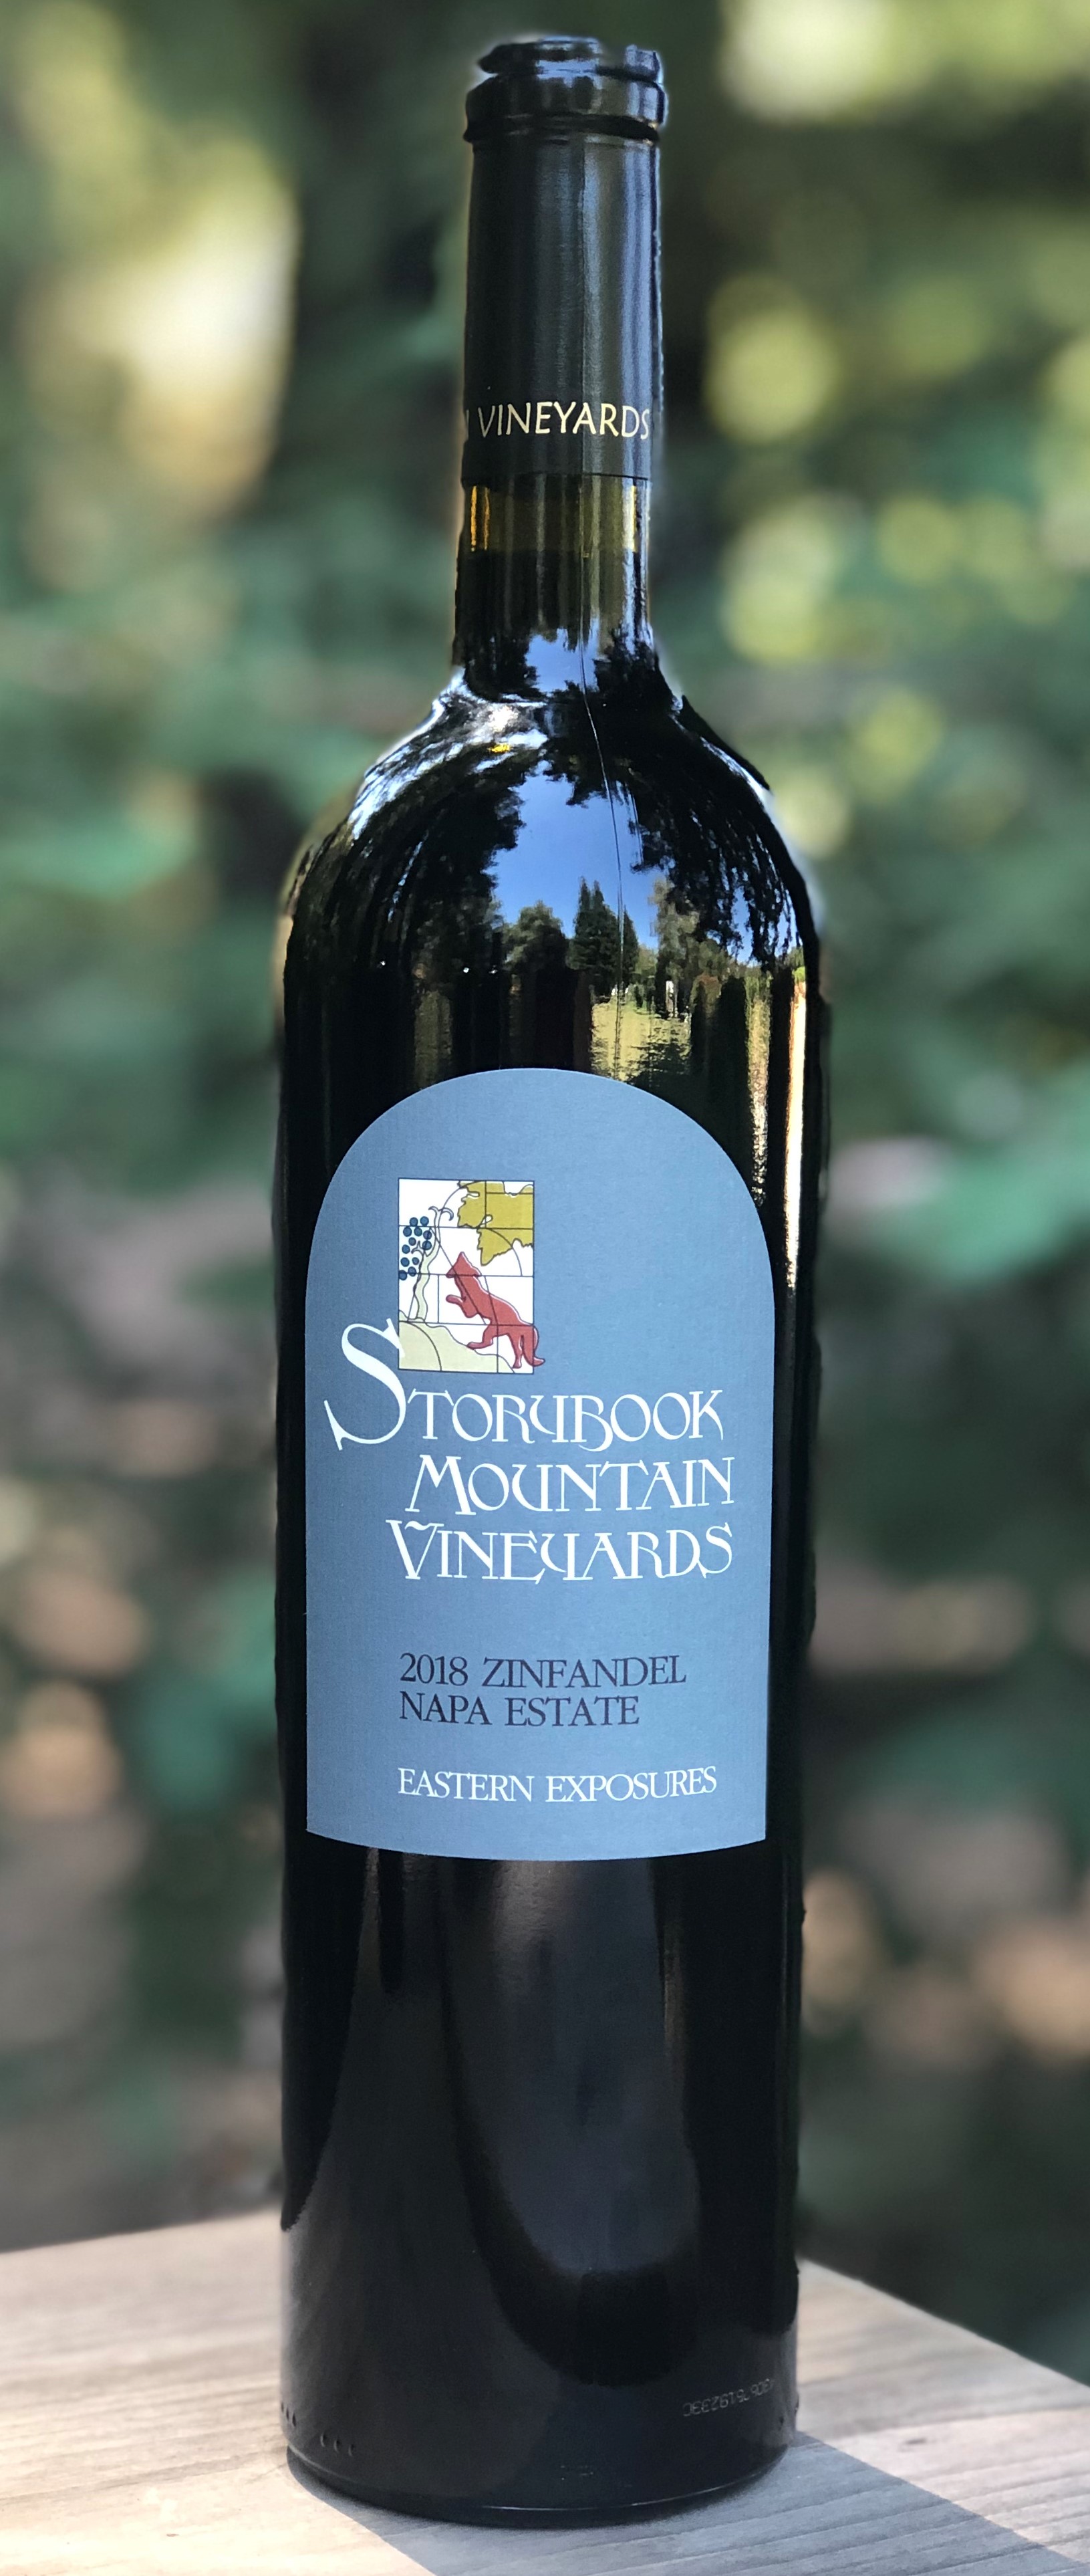 Product Image for 2018 Eastern Exposures Zinfandel